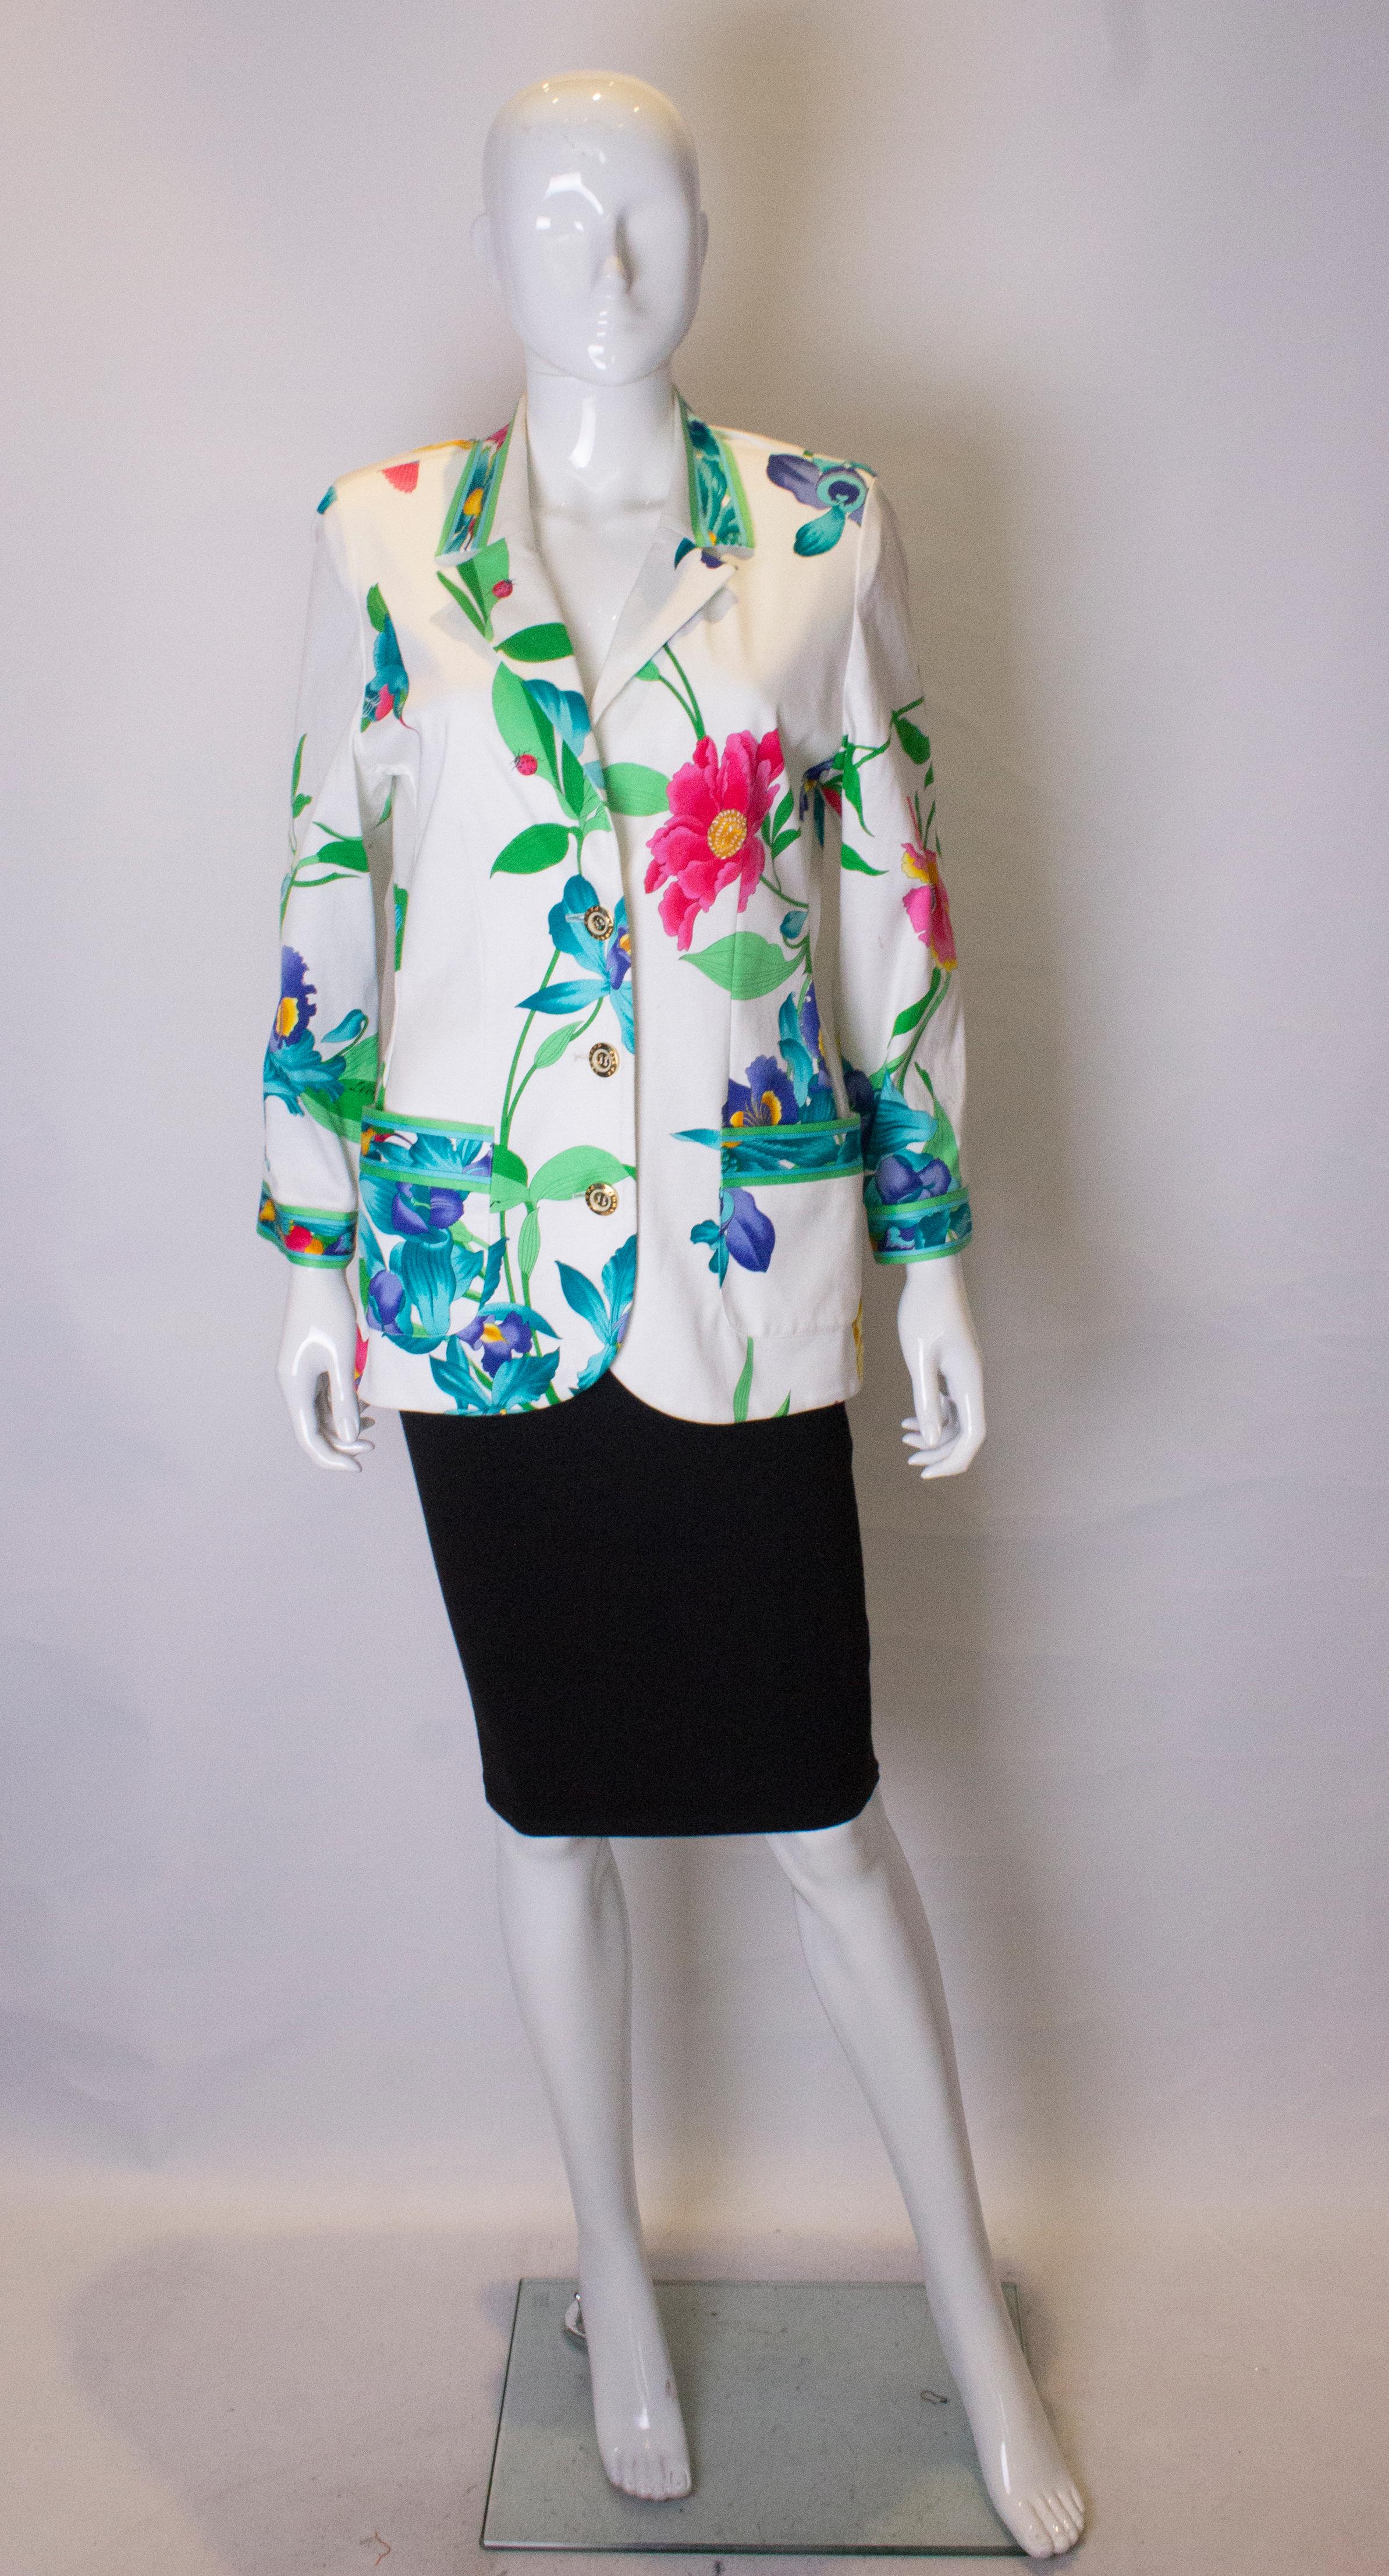 A great vintage jacket by Leonard. With a white background, the jacket has a multicolour floral design, and two pockets at hip leval.